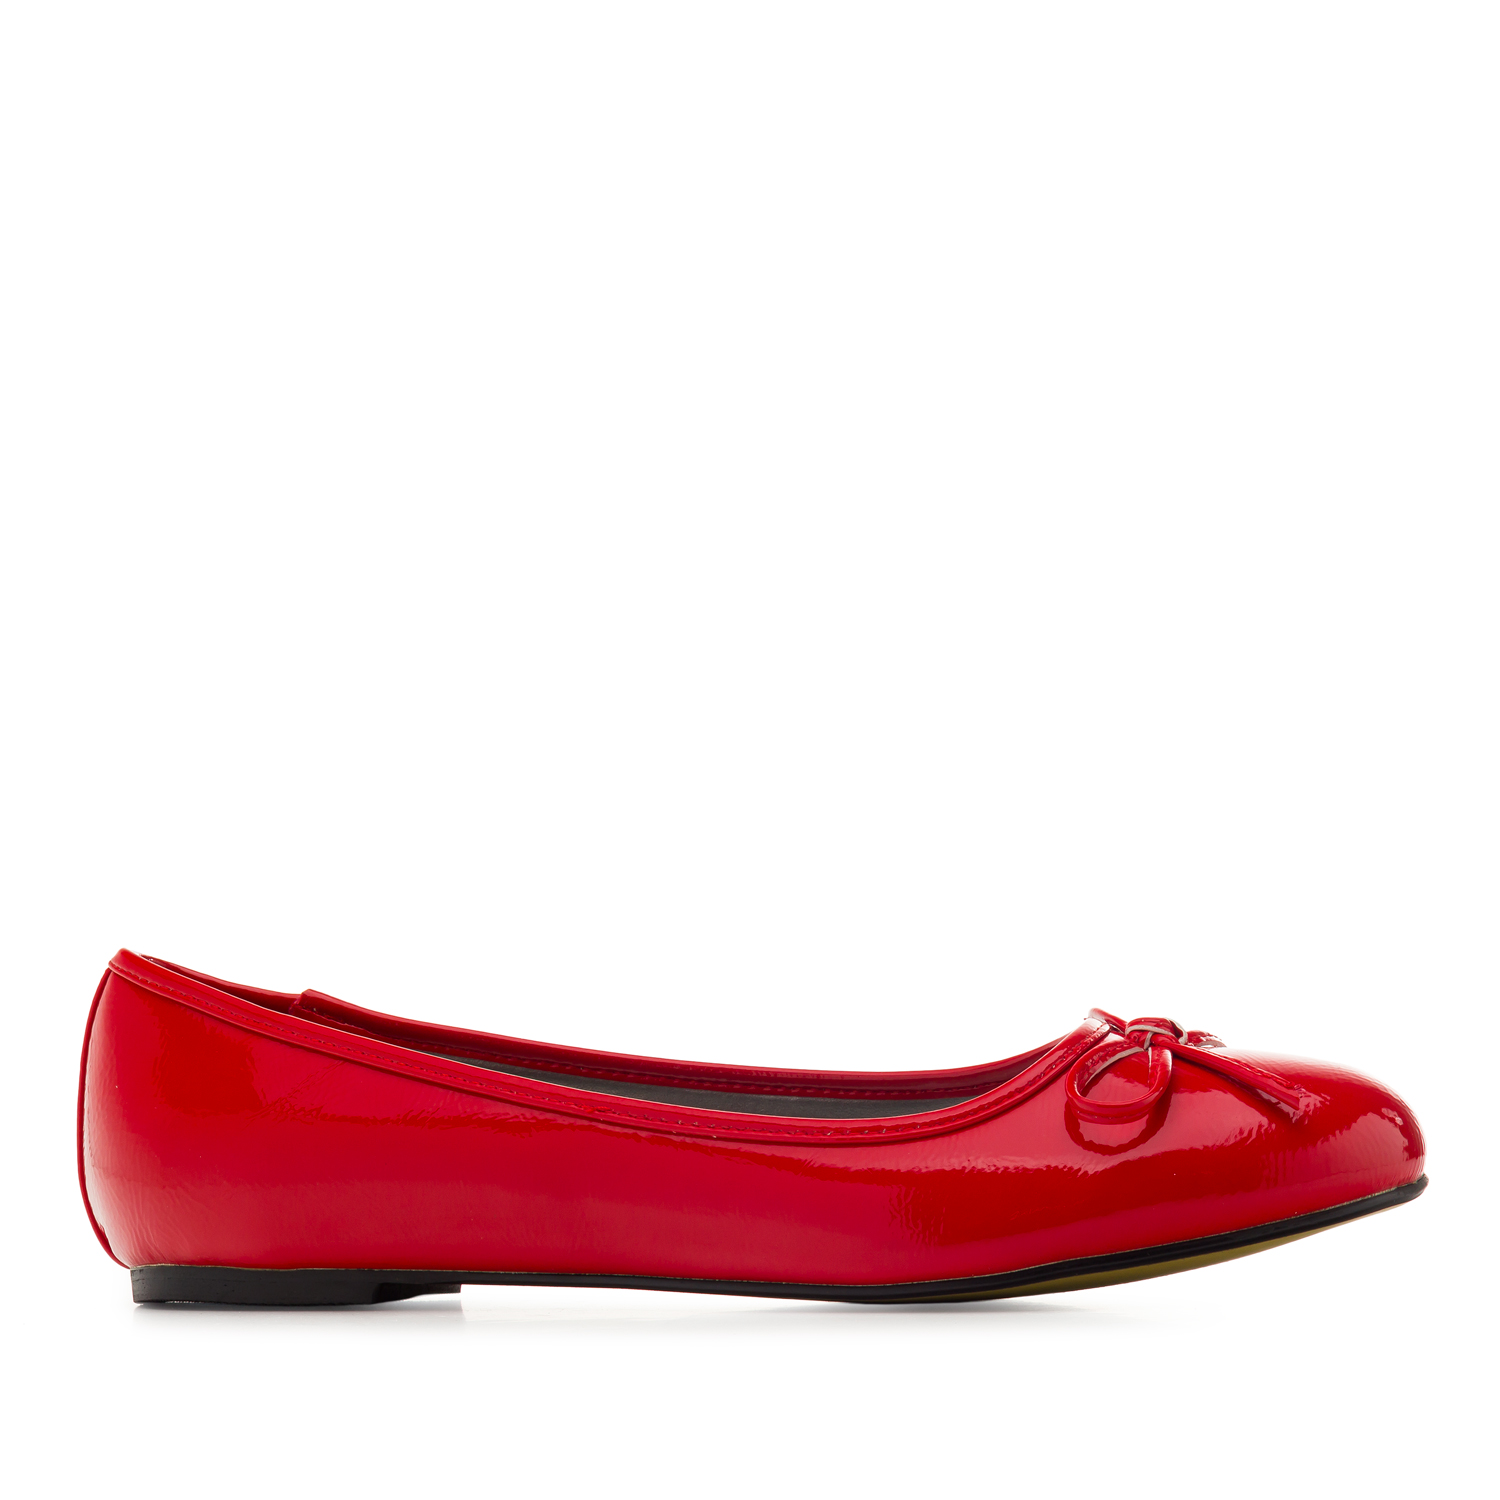 Red faux-patent leather Ballerinas with bow. 